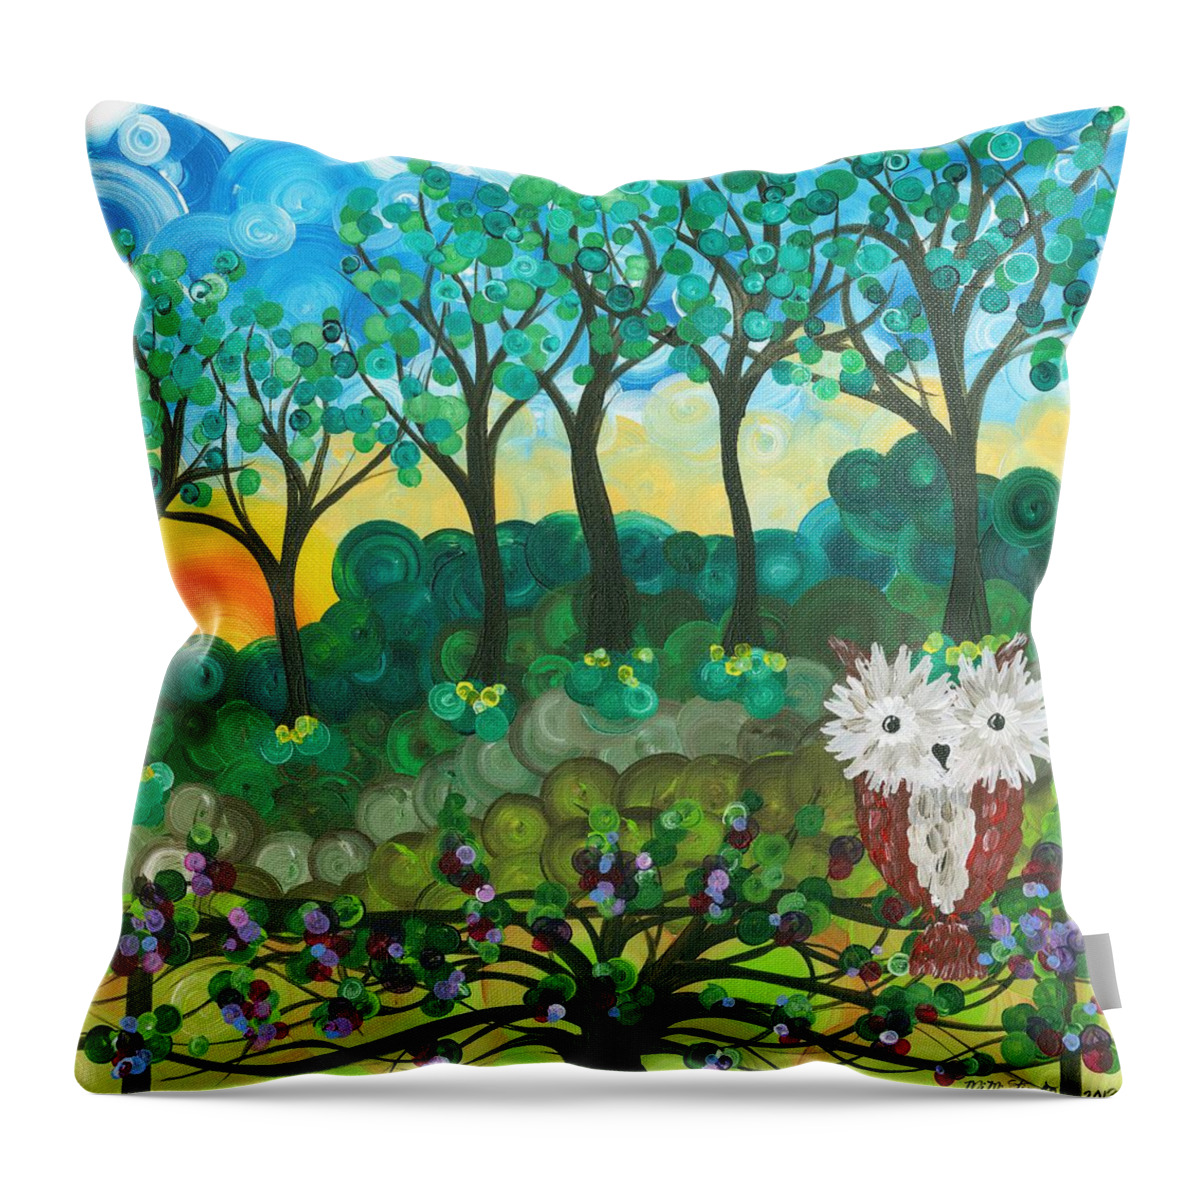 Owls Throw Pillow featuring the painting Owl Expressions 06 by MiMi Stirn